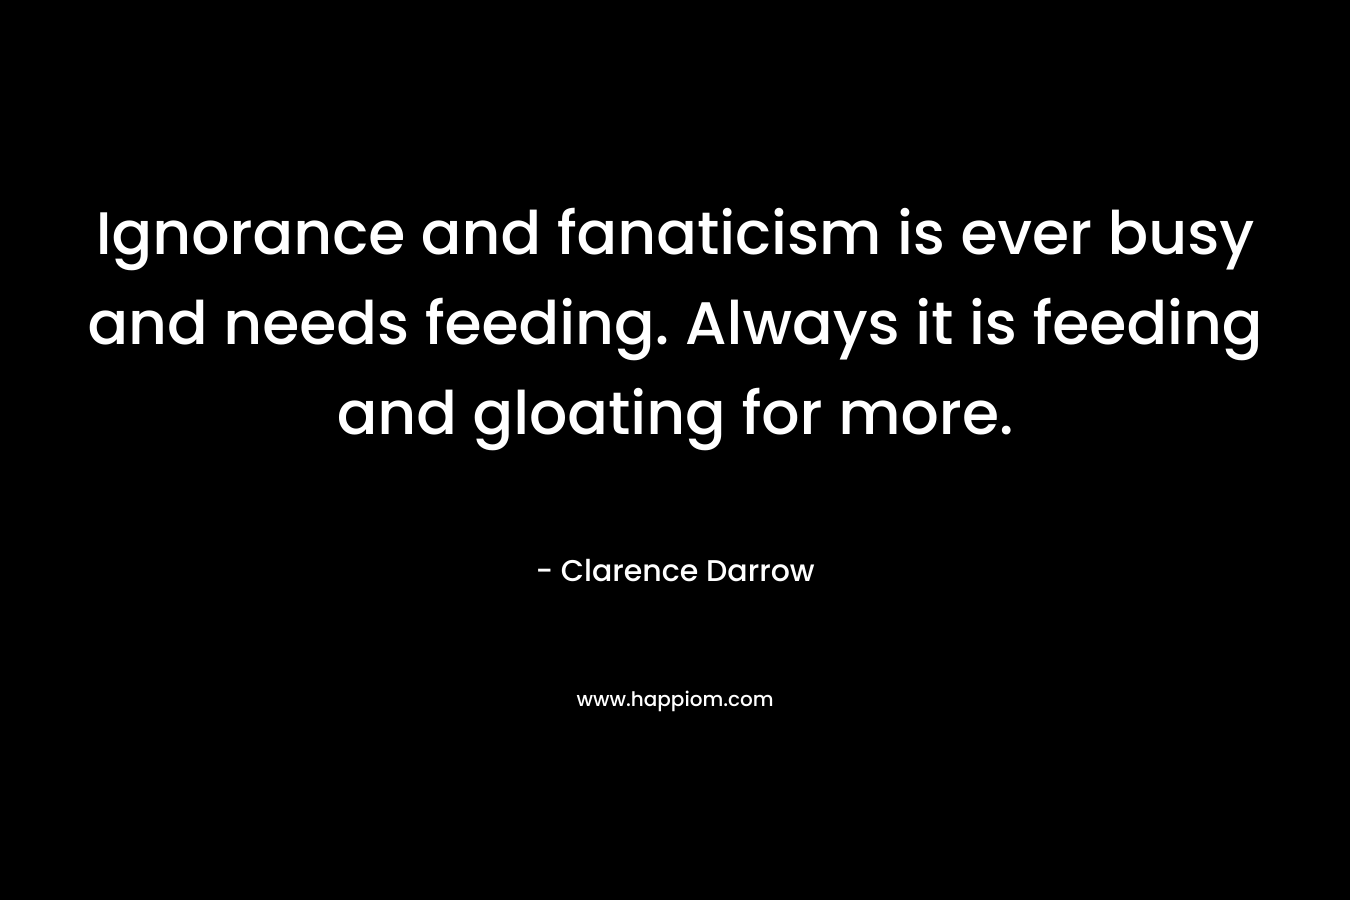 Ignorance and fanaticism is ever busy and needs feeding. Always it is feeding and gloating for more.